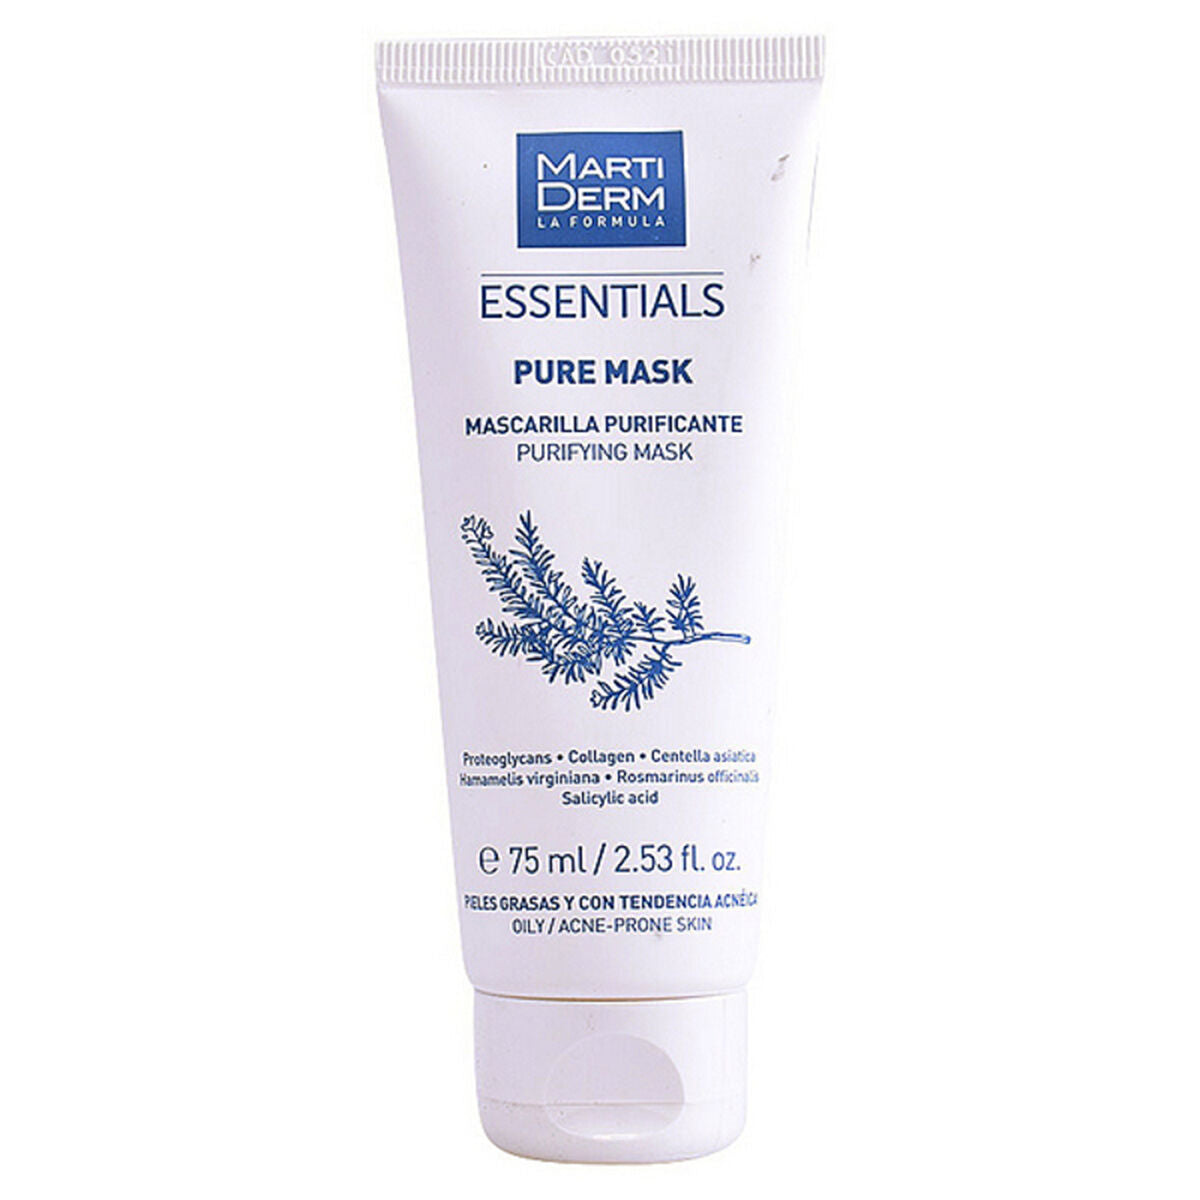 Purifying Mask Essentials Martiderm Puremask Oily (75 ml) Cleansing masque White (1 Unit)